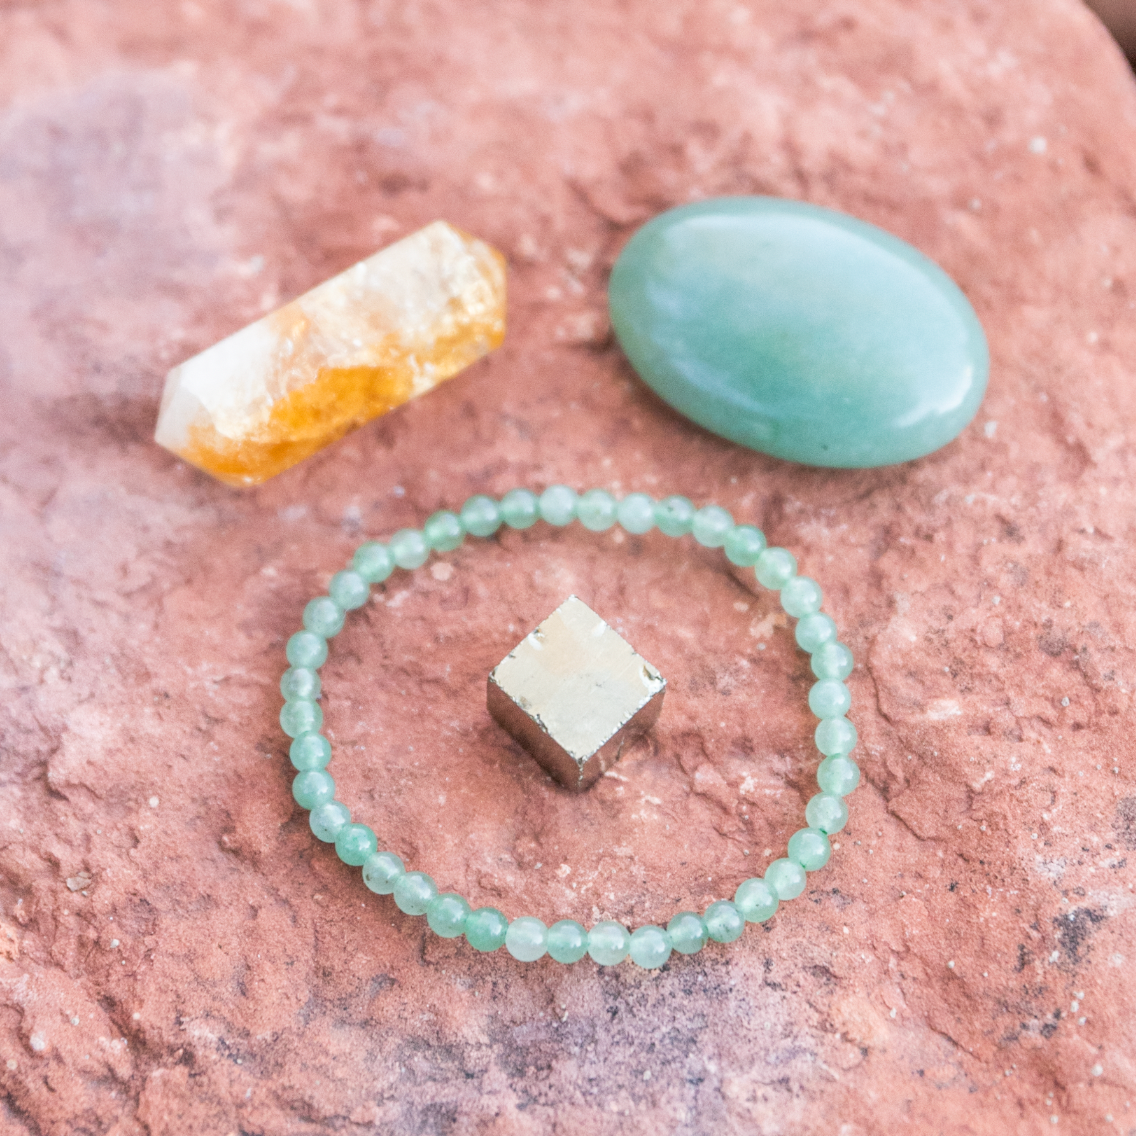 healing crystals: a bundle of crystals used to help attract wealth and abundance in sedona, arizona